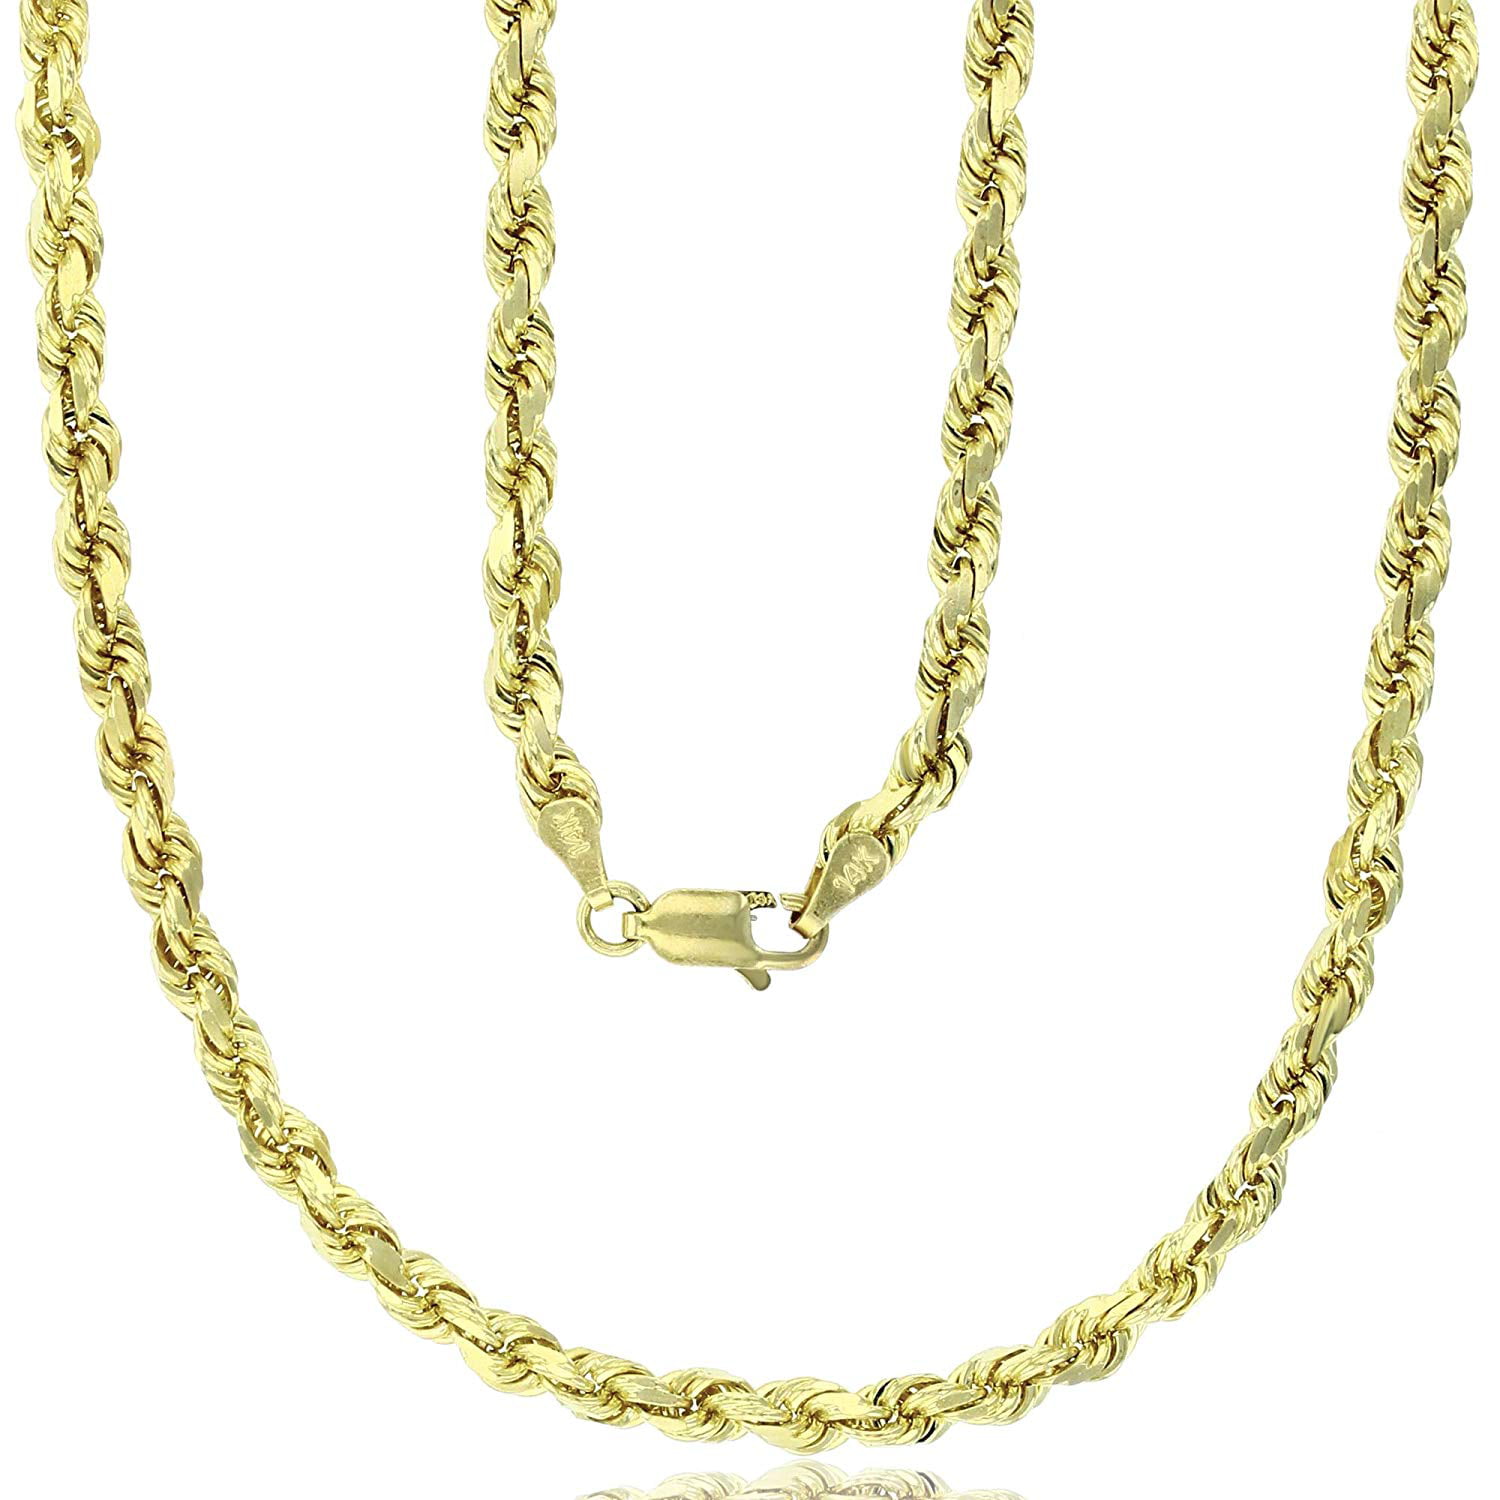 14K Yellow Gold 1mm Diamond Cut Rope Chain Necklace with Lobster Claw Clasp 